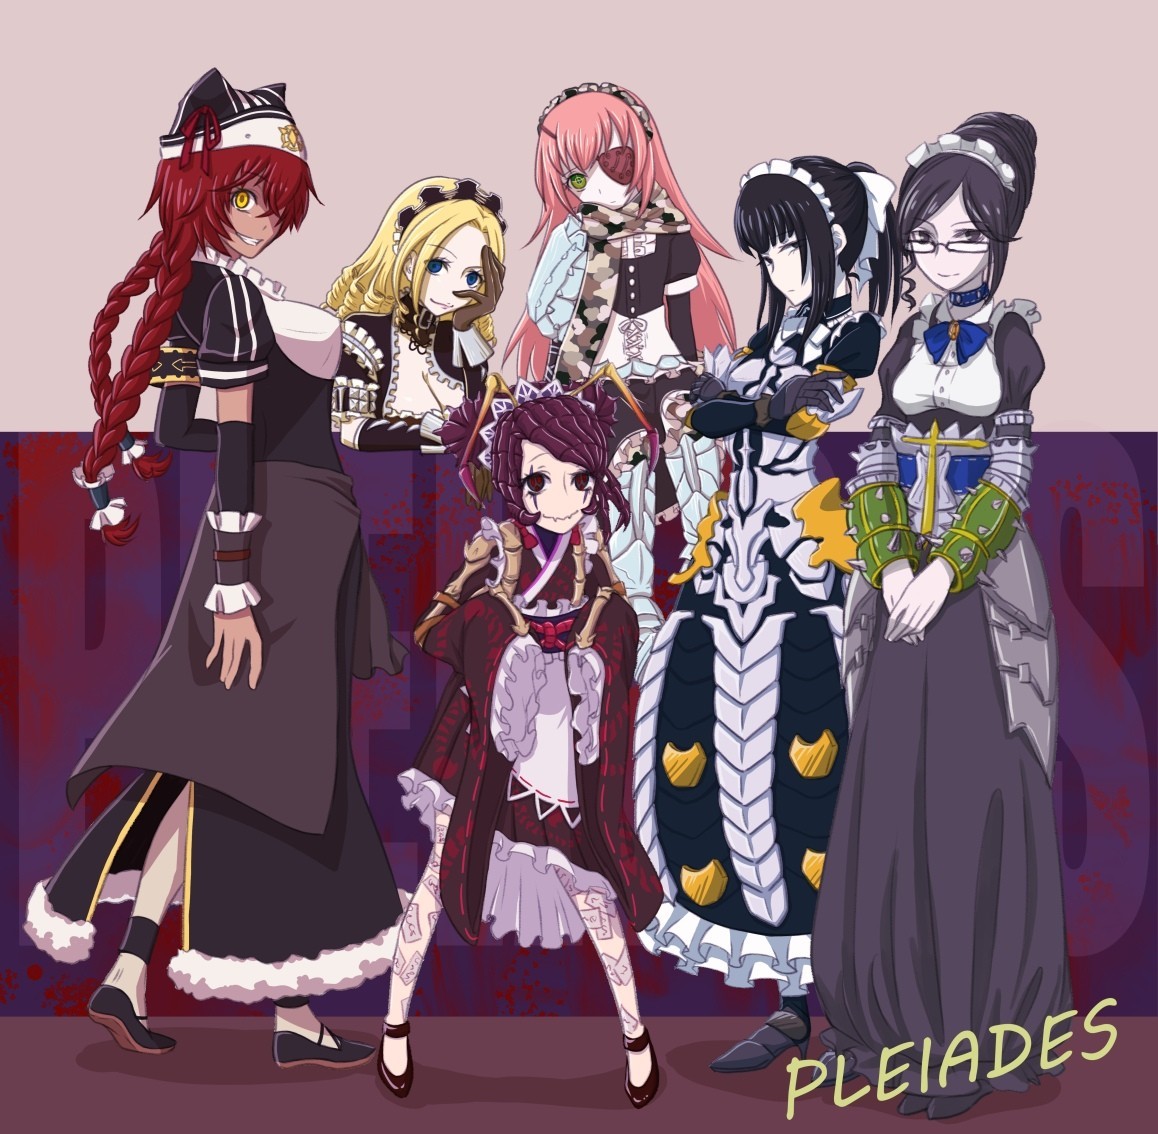 The best maids in the world - Pleiades! - Anime, Overlord, , Housemaid, Anime art